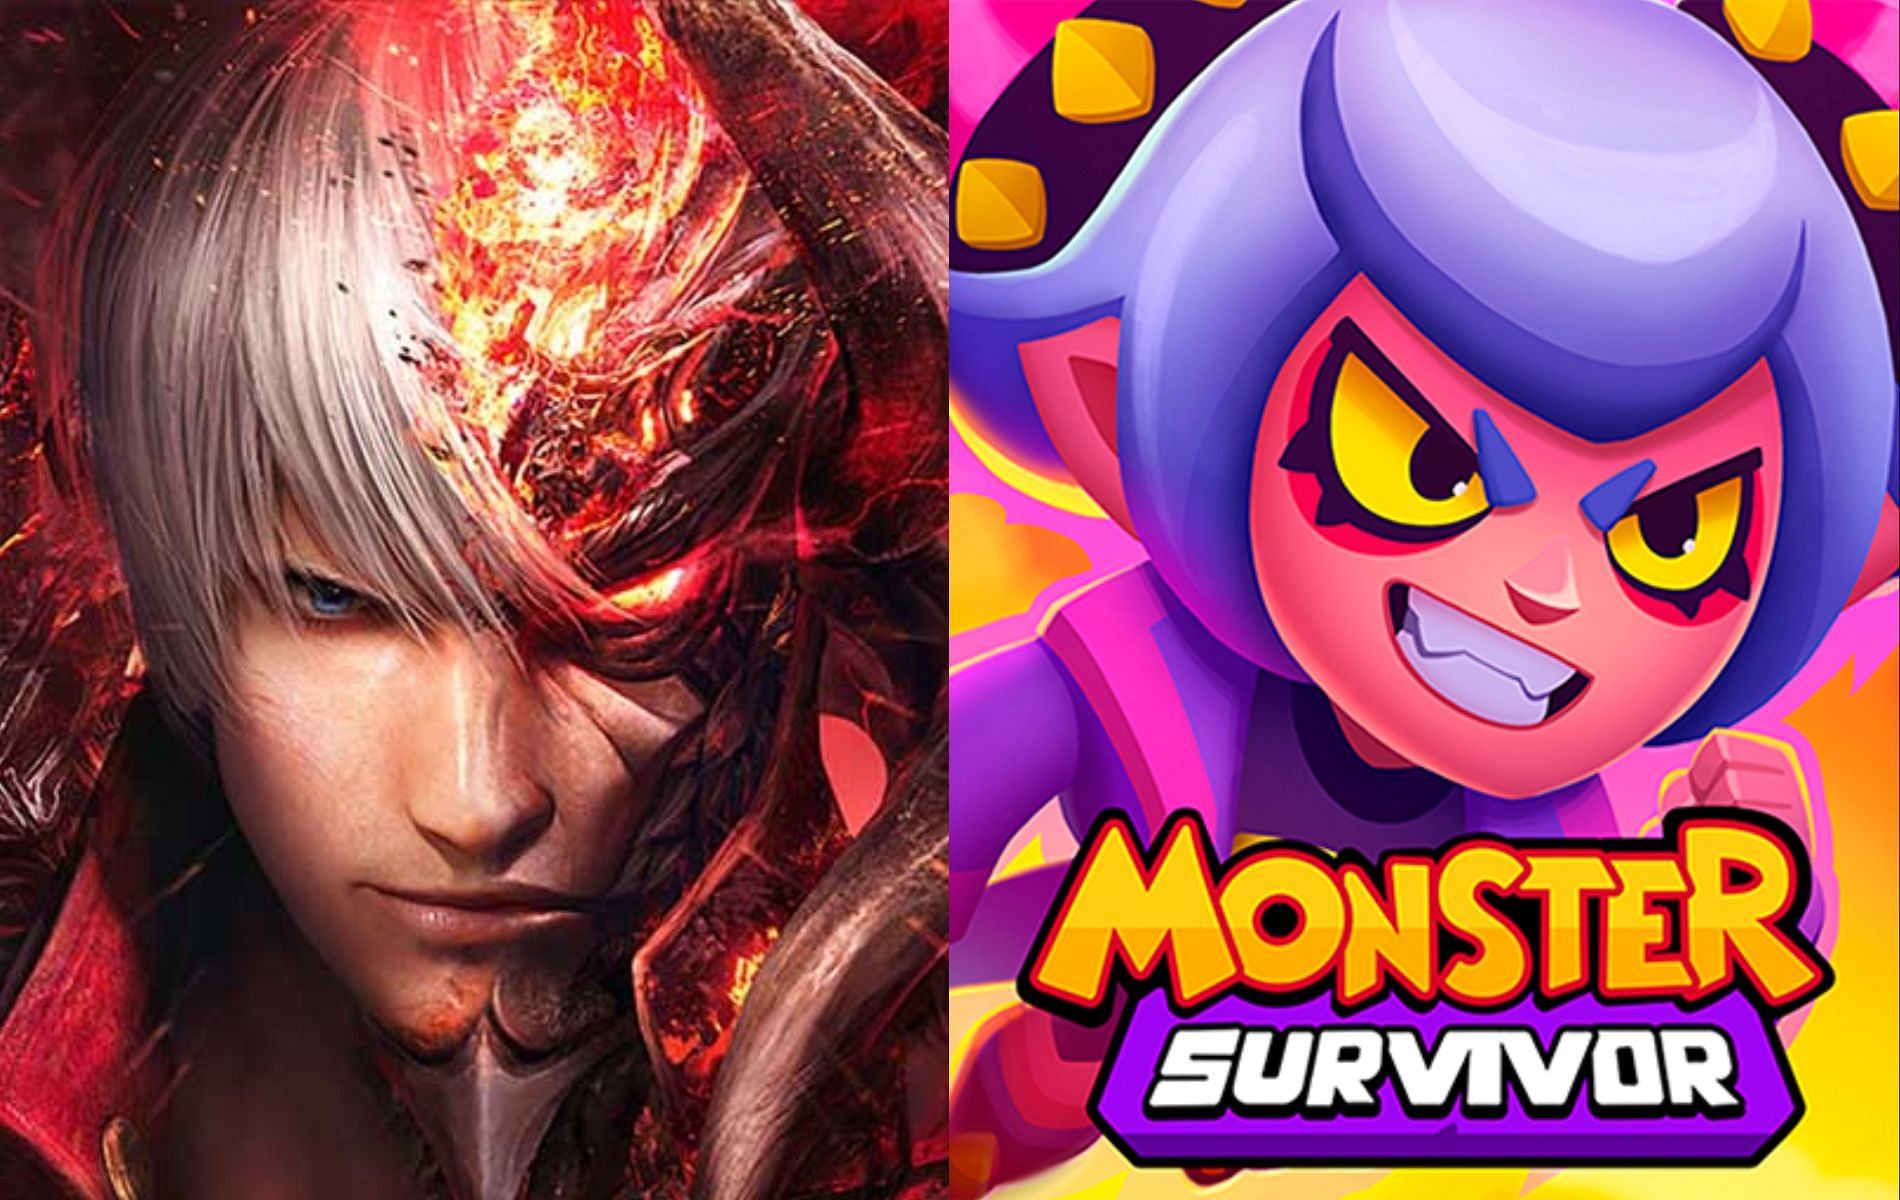 Get ready for an action-packed April with these upcoming mobile games (Images via Capcom and Codigames)